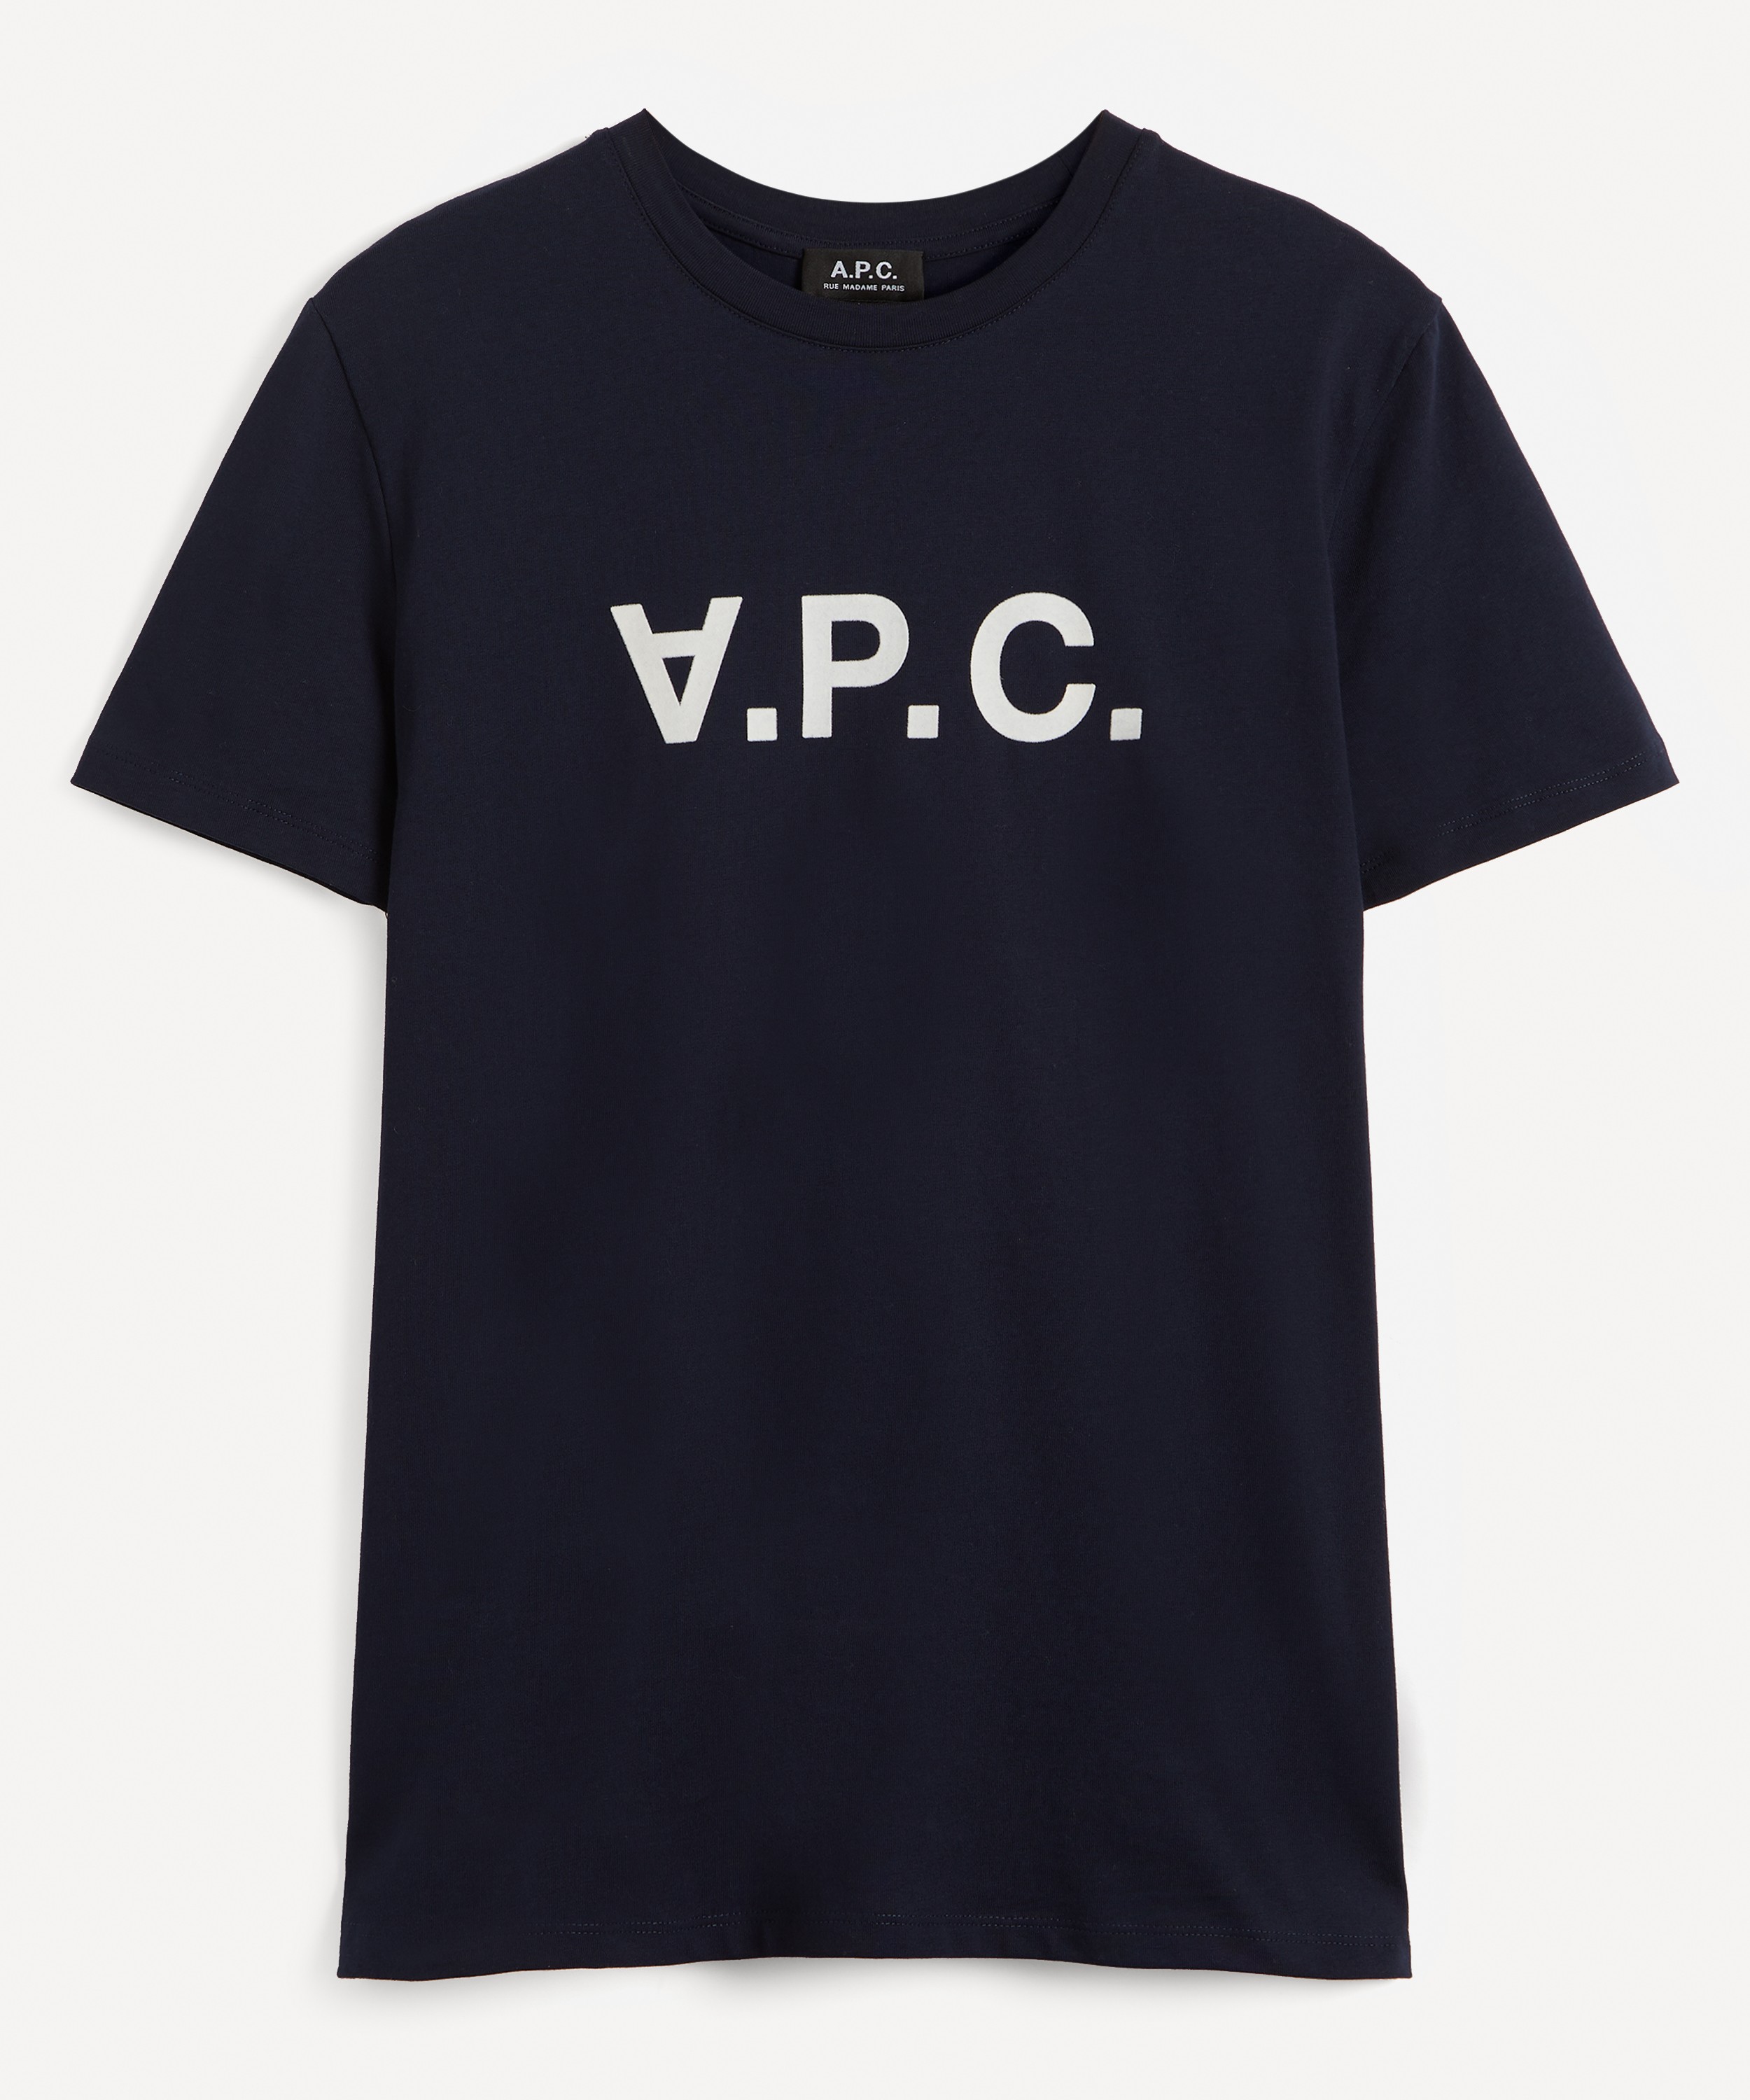 A.P.C. - VPC Logo T-Shirt image number null